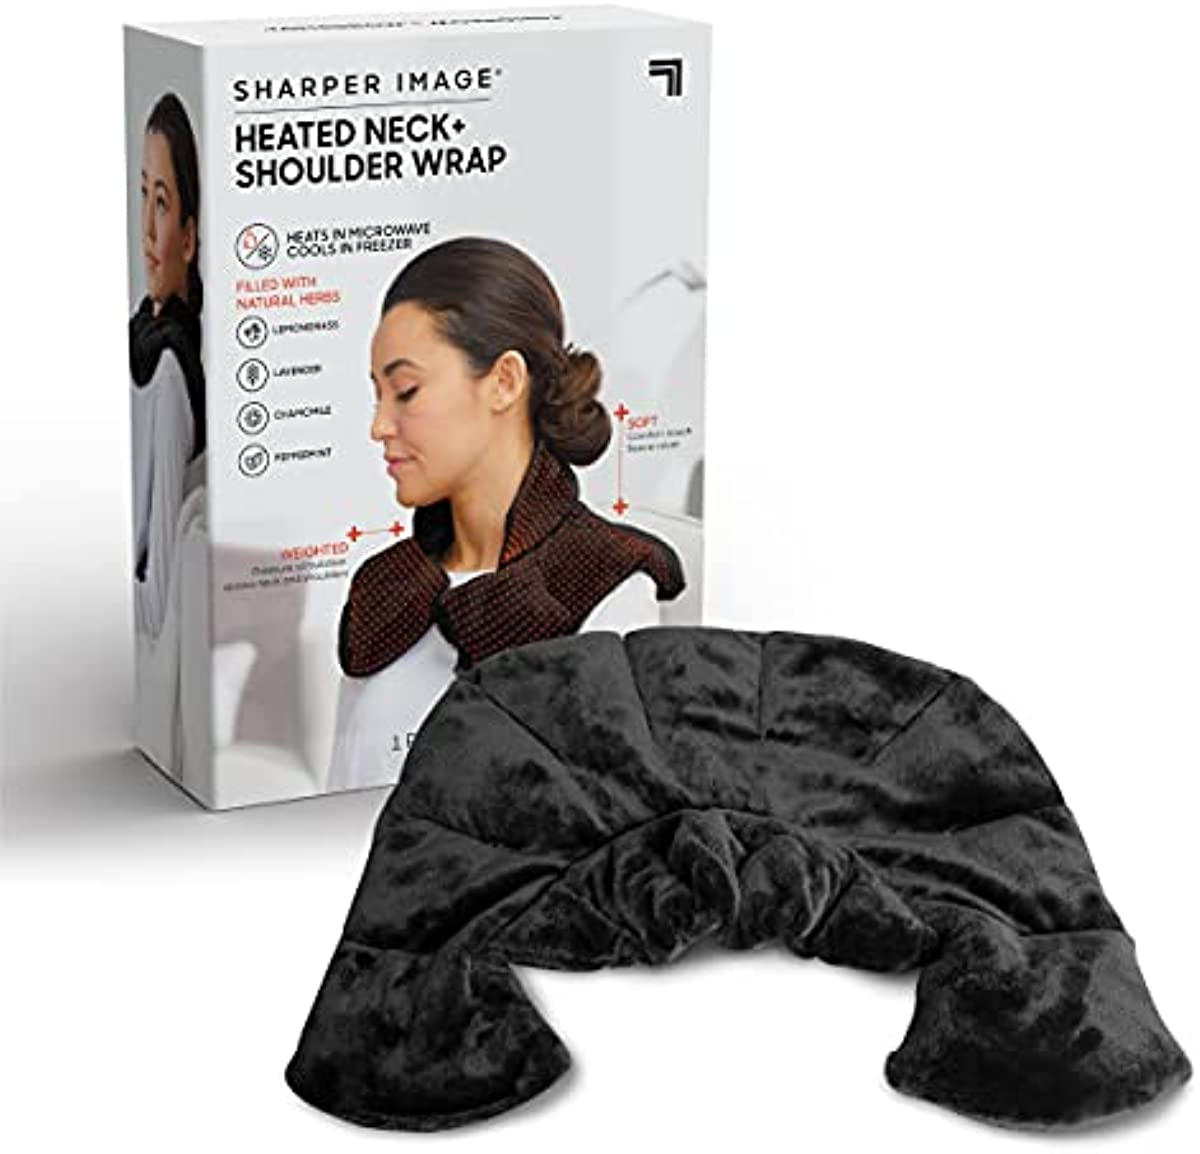 SHARPER IMAGE Warm & Cooling Herbal Aromatherapy Neck & Shoulder Plush Wrap Pad for Soothing Muscle Pain and Tension Relief Therapy, 100{d9f90e1dd76717a4a0b2a9026c597910fbe48532101c988c403e4e41af012c31} Natural Lavender & Herb Spa Blend, Holiday Gift